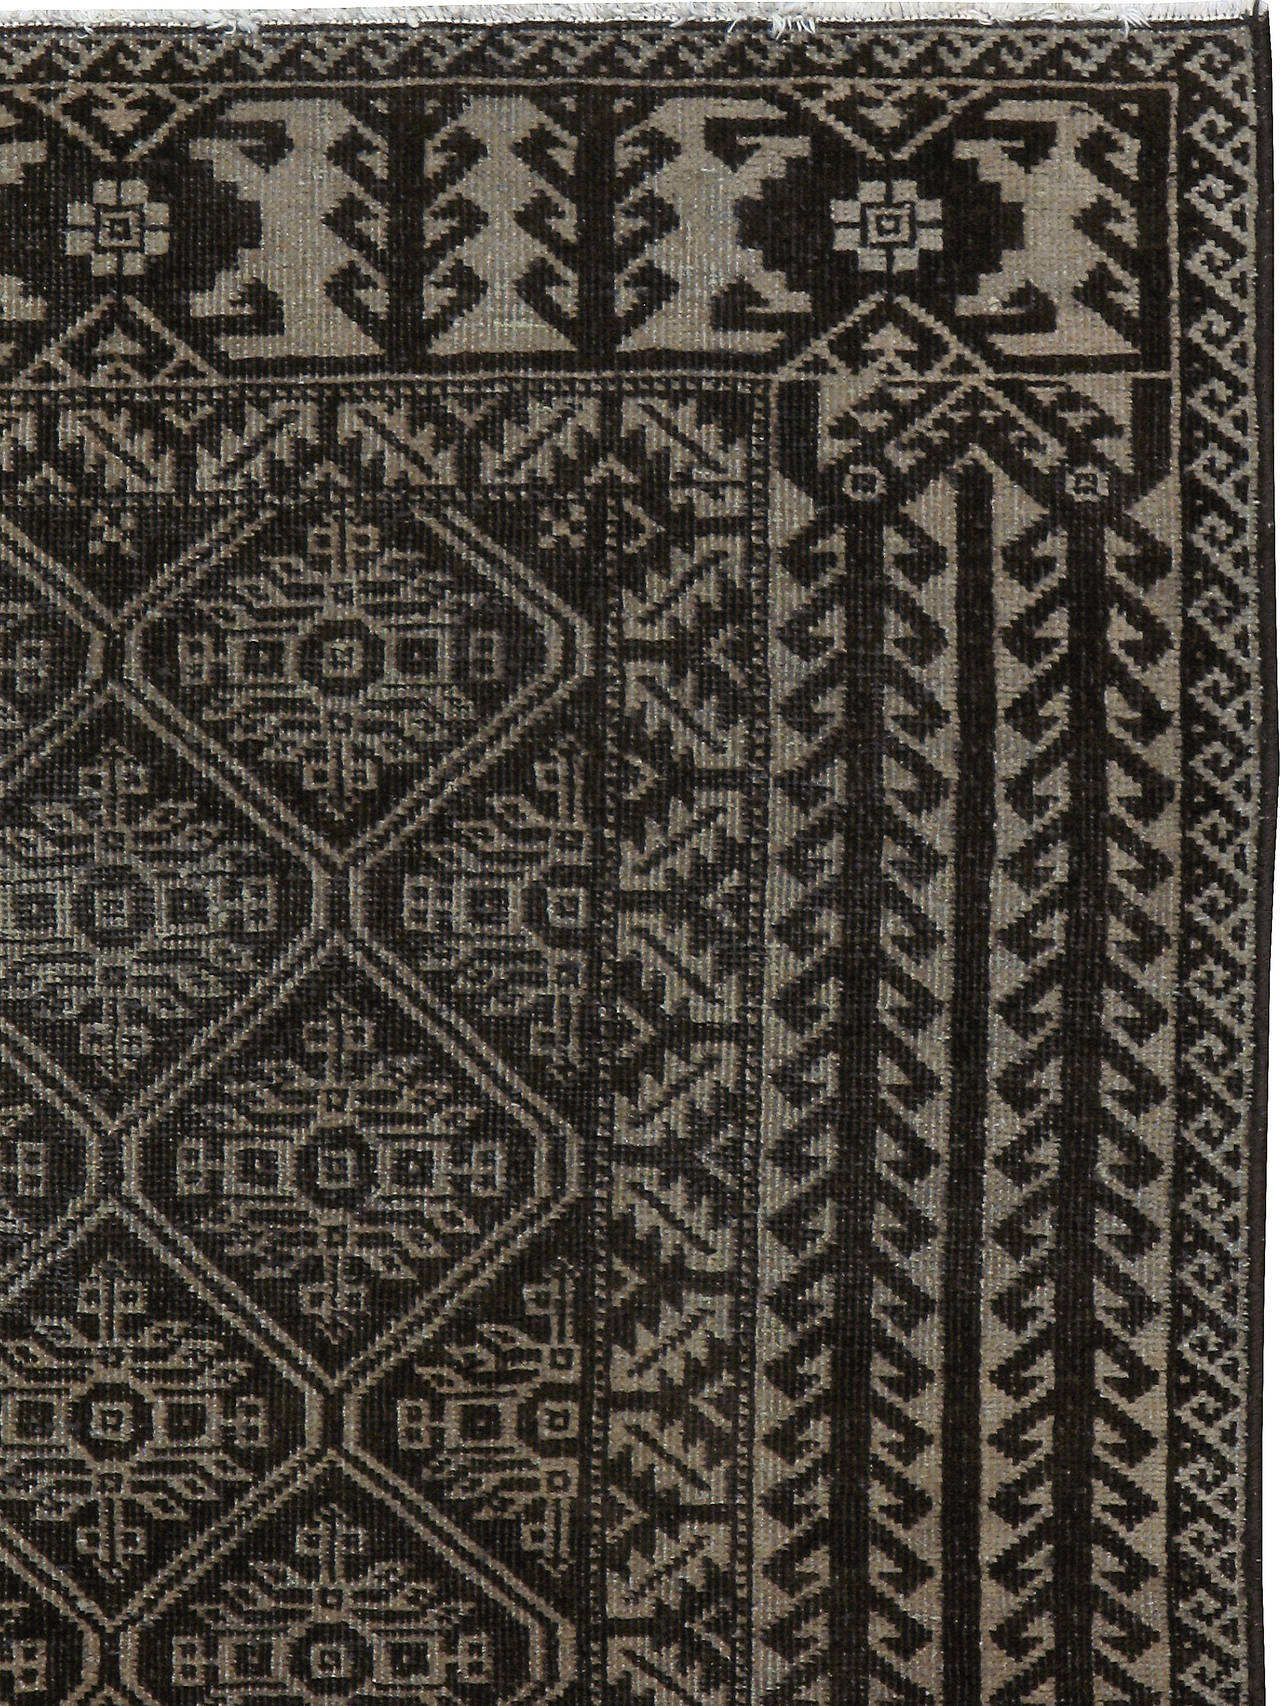 An antique Persian Baluch carpet from the second quarter of the 20th century.